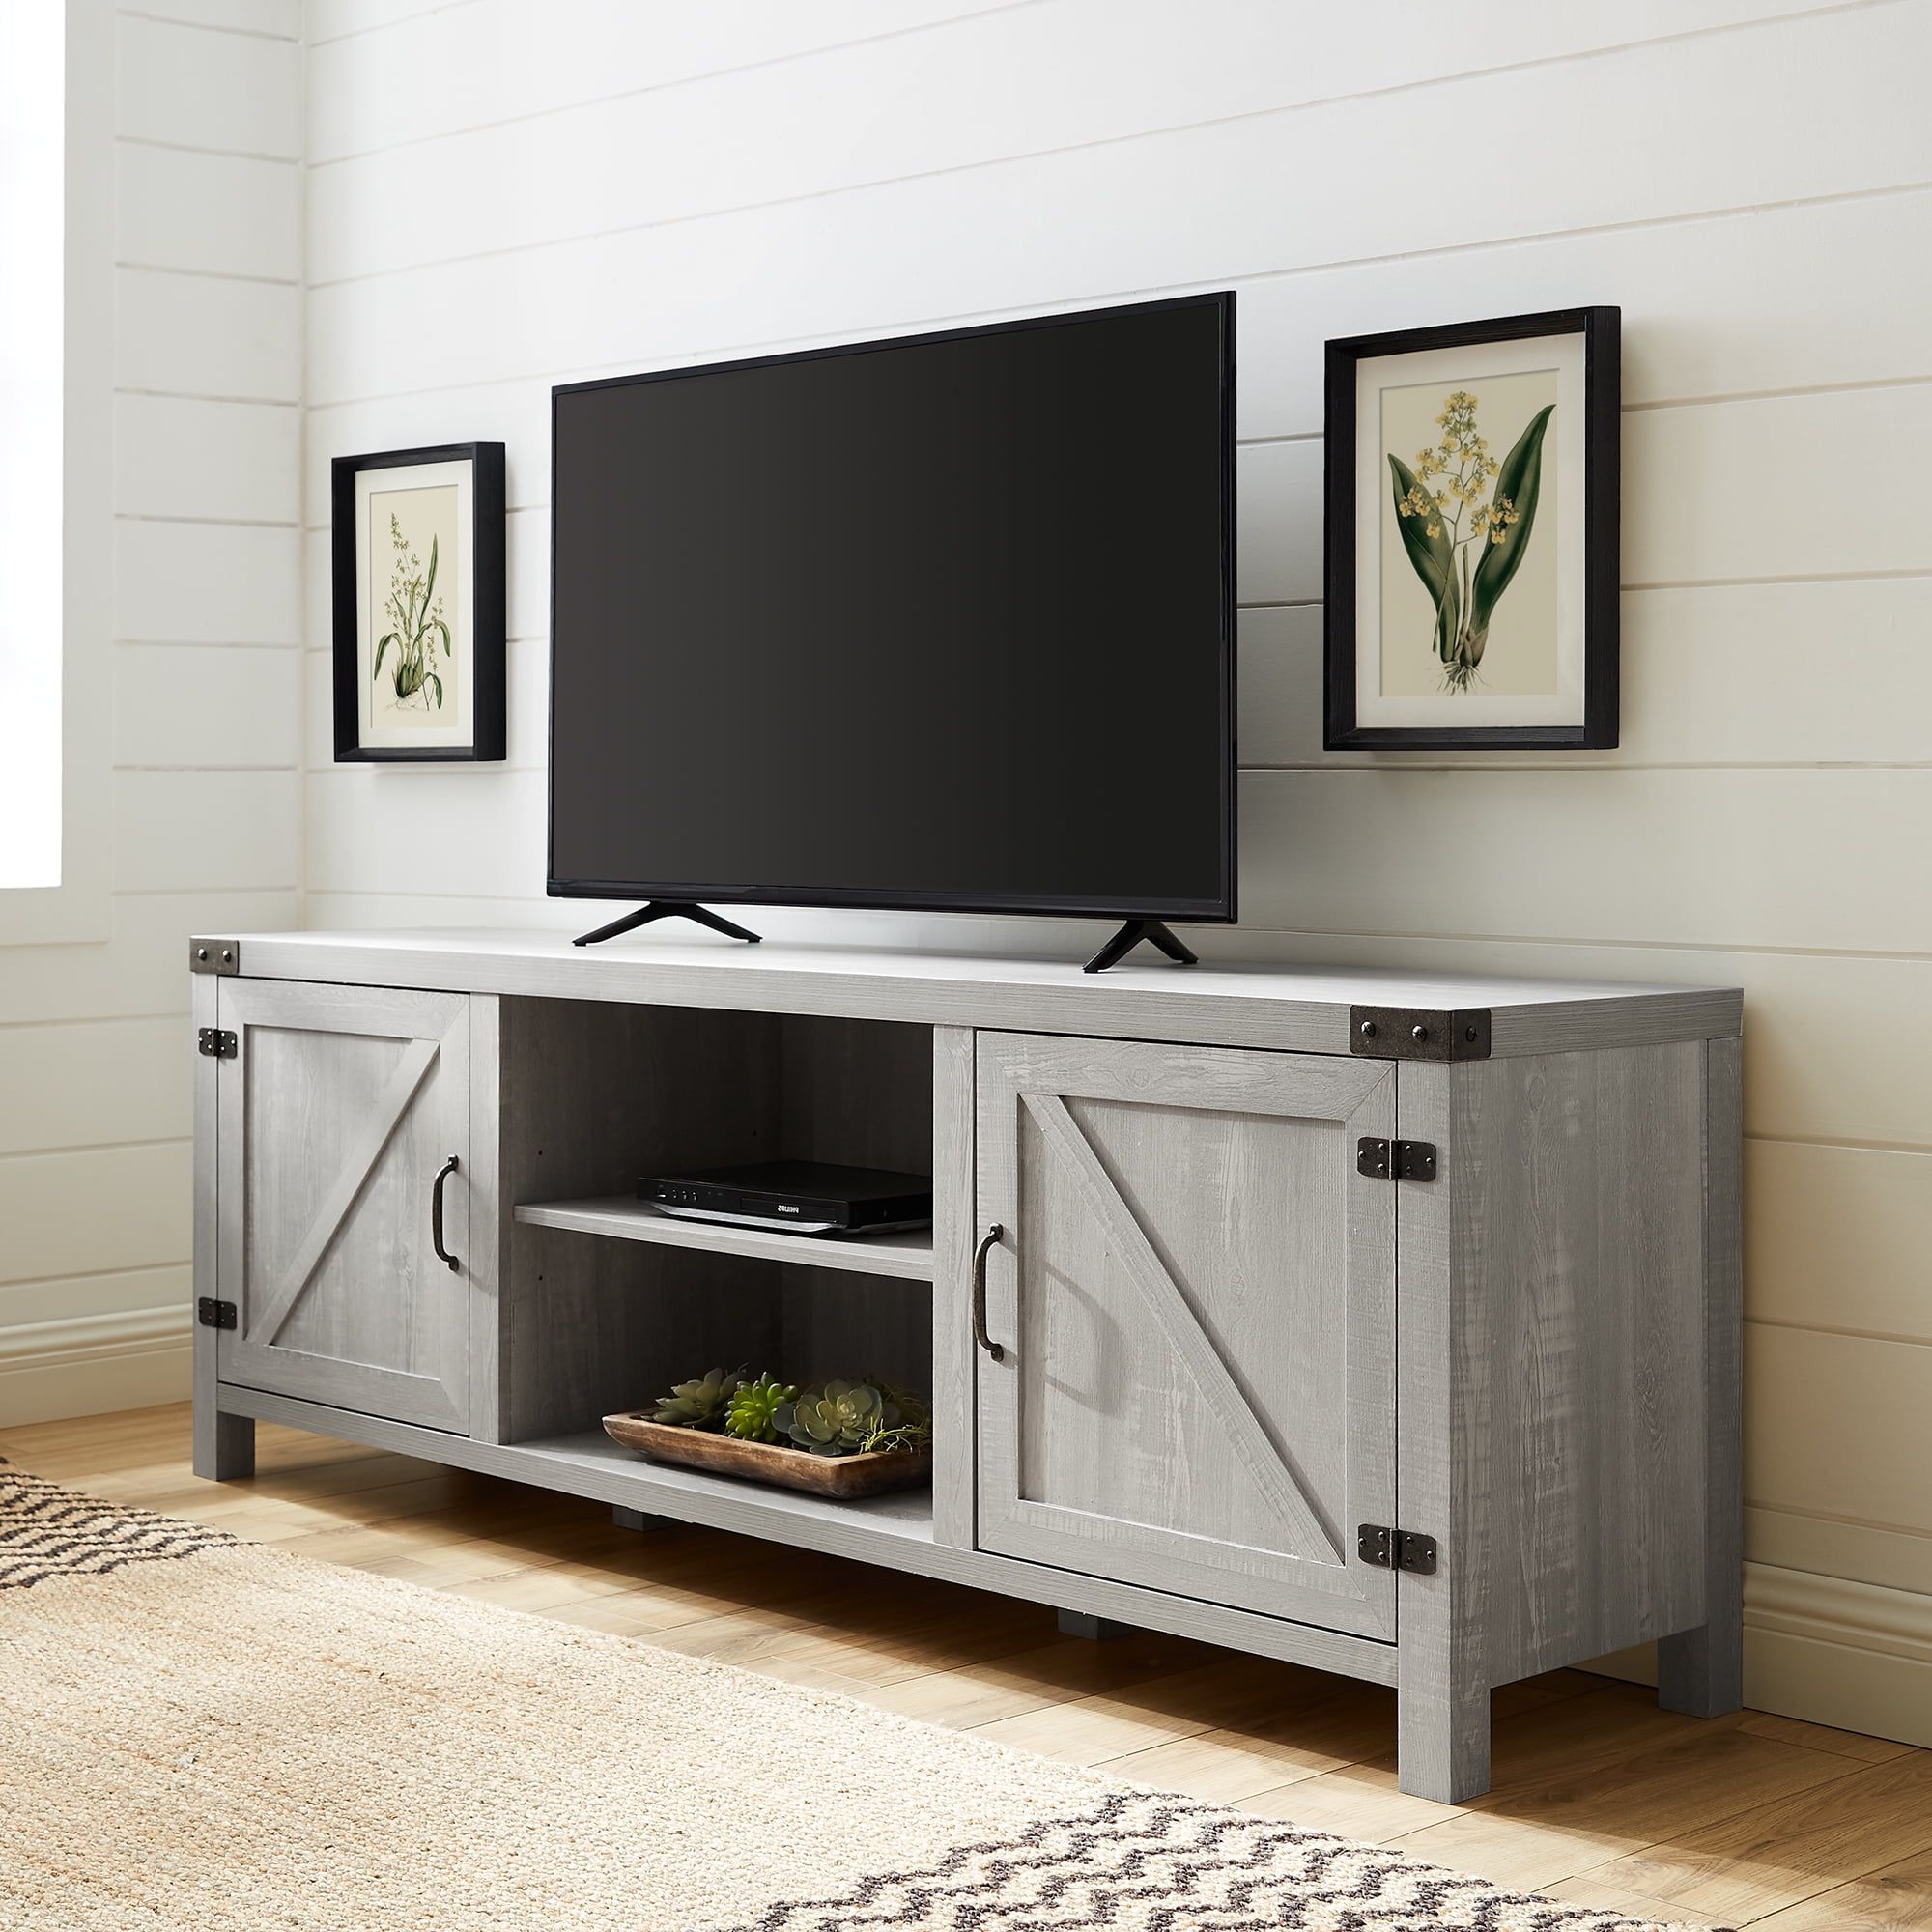 2020 Woven Paths Farmhouse Barn Door Tv Stand For Tvs Up To 80", Stone Grey Intended For Farmhouse Tv Stands (View 14 of 15)